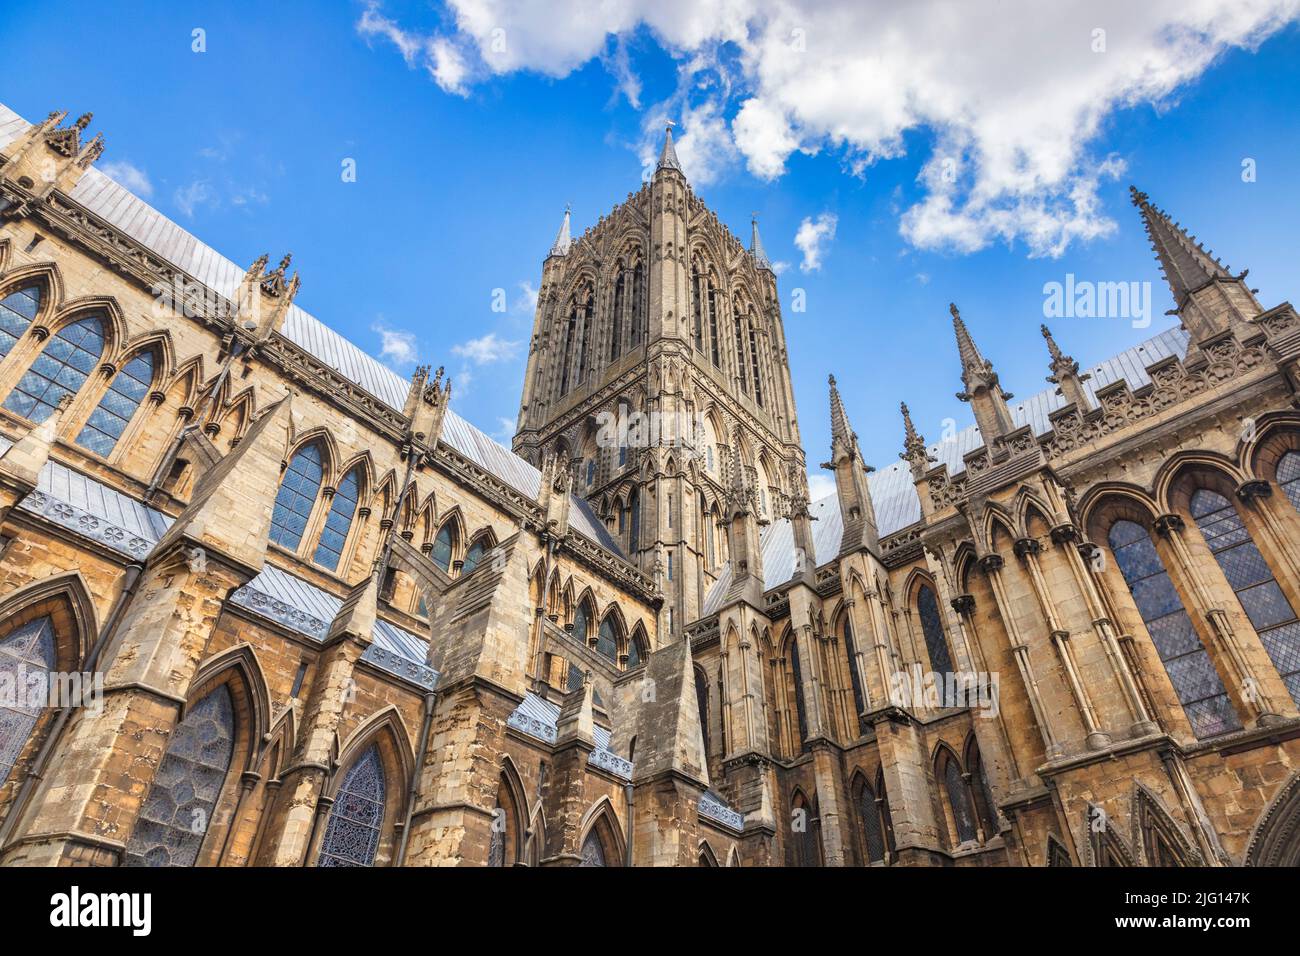 Exterior of Lincoln Cathedral, looking up to blue sky. Stock Photo